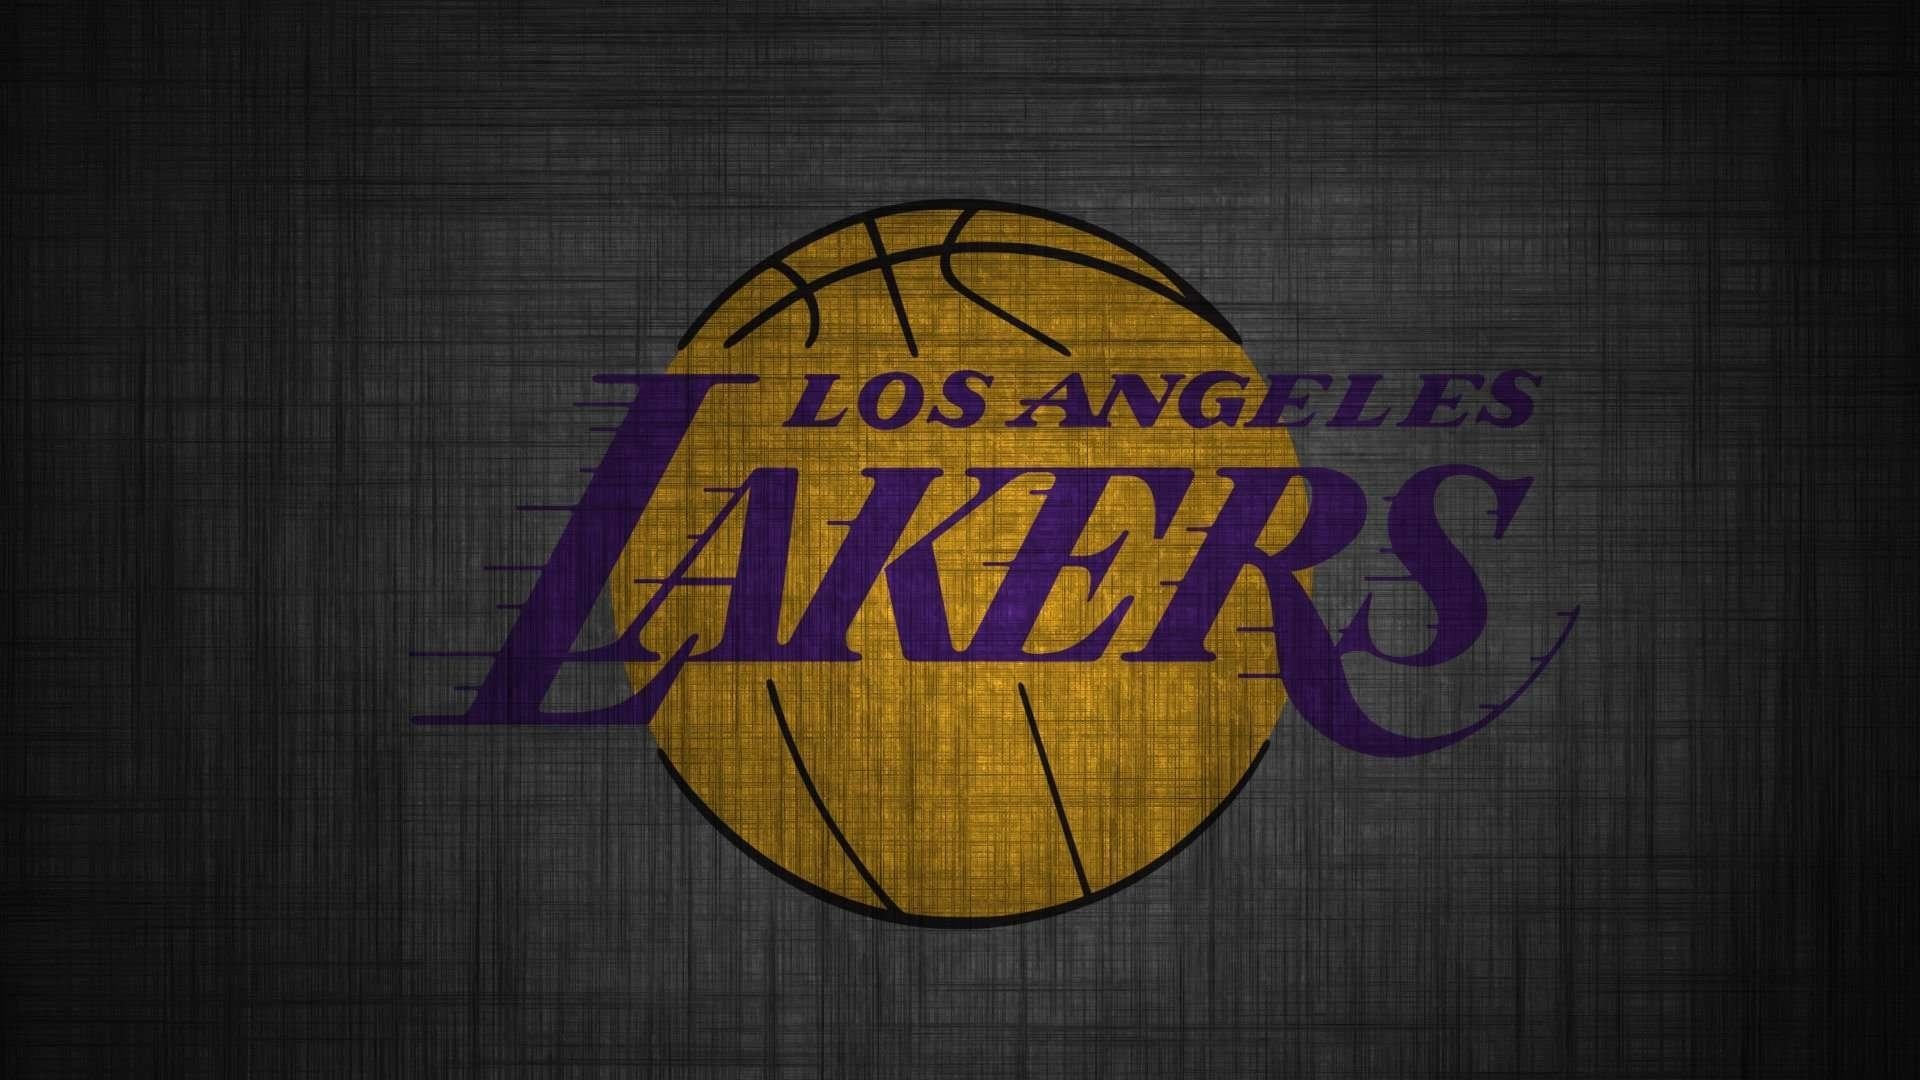 Los Angeles Lakers: The team traded several prospects for star big man Anthony Davis in 2019. 1920x1080 Full HD Background.